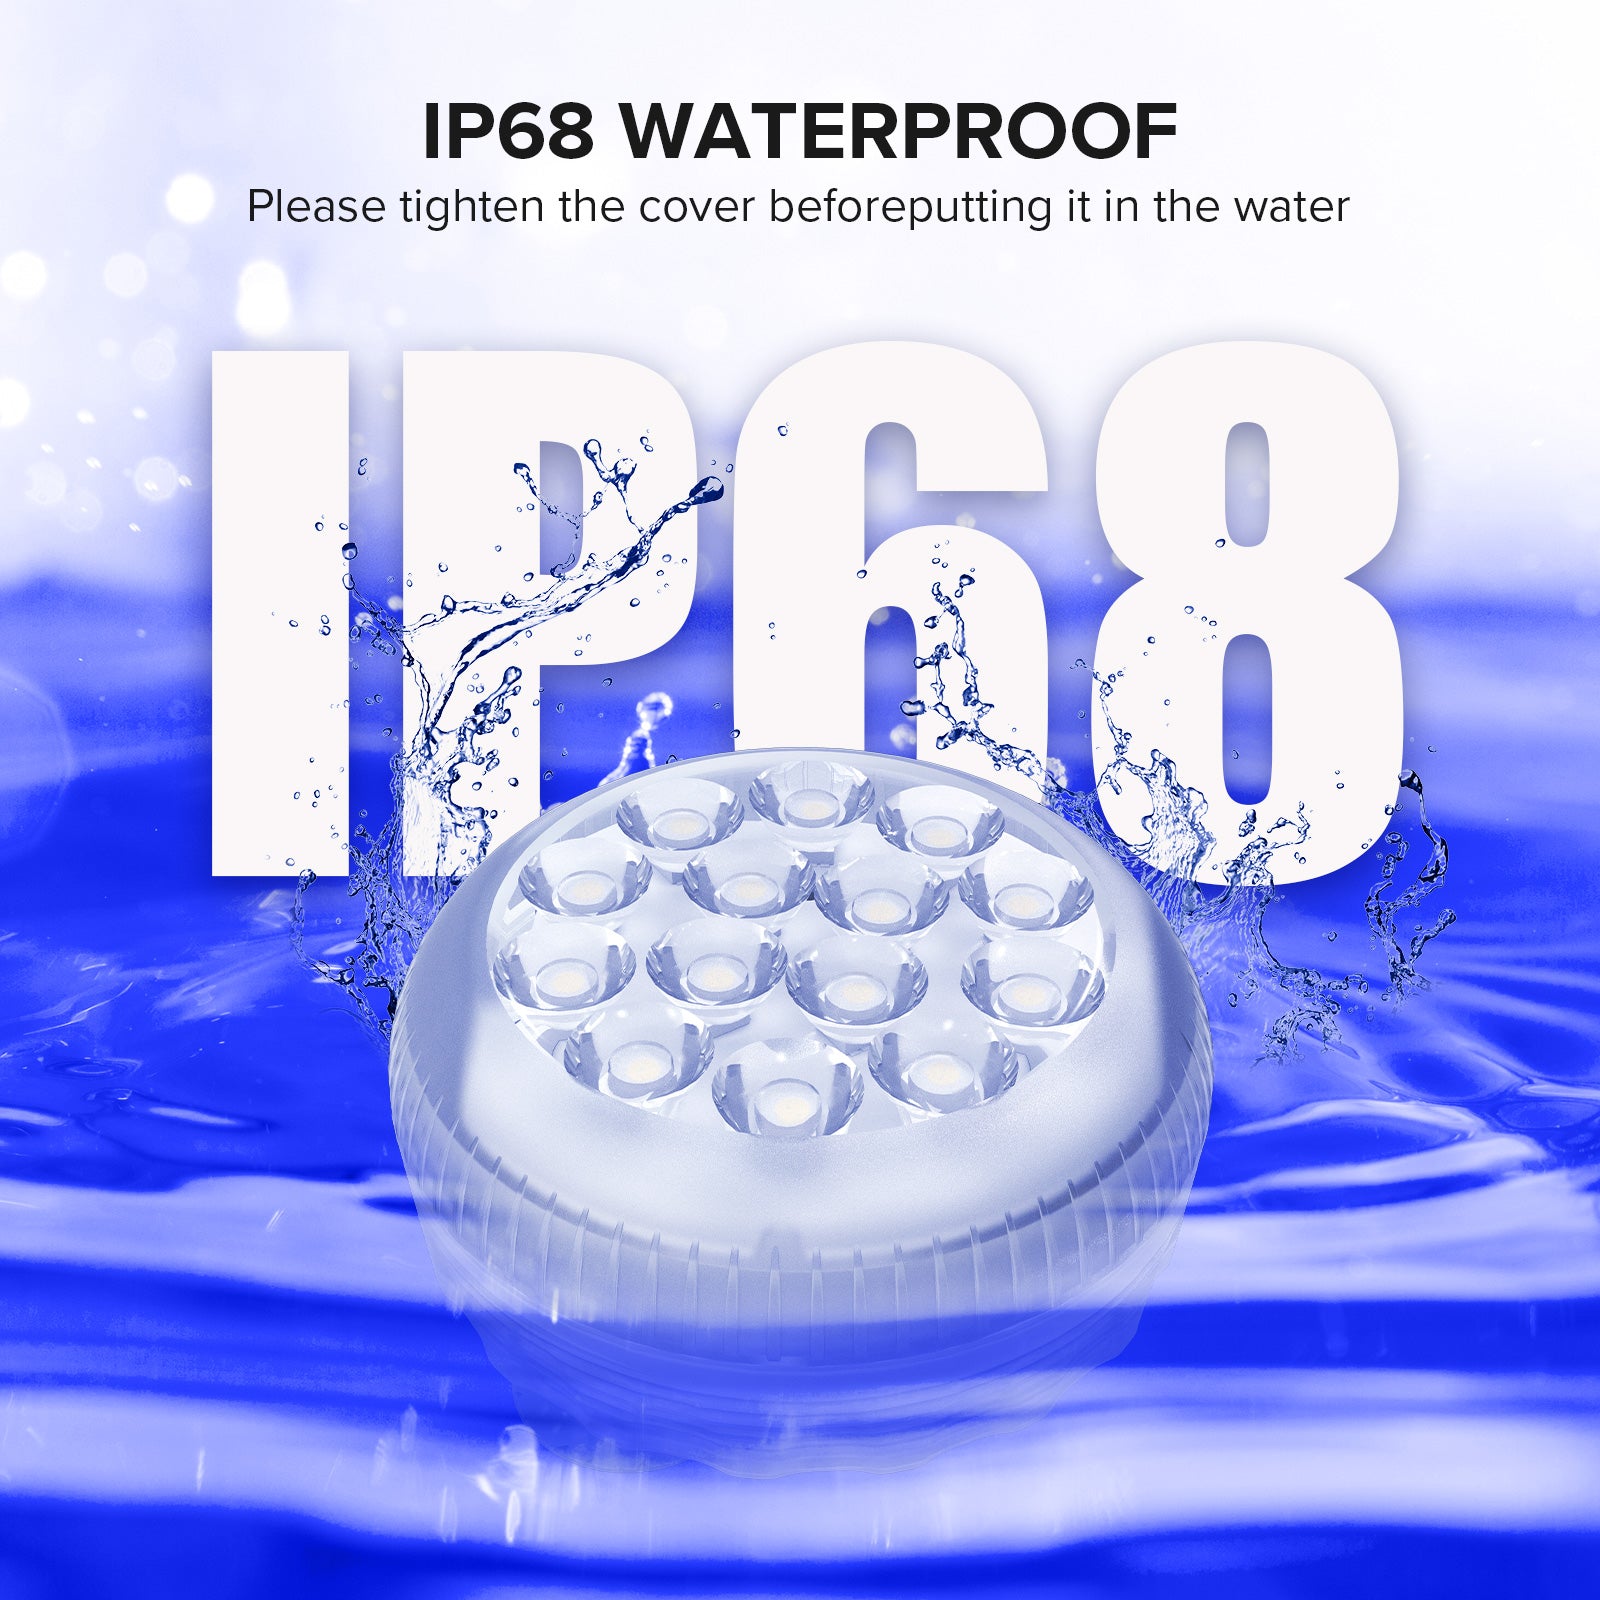 RGB LED Submersible Pool Light (US ONLY) is IP68 waterproof，please tighten the cover beforeputting it in the water.